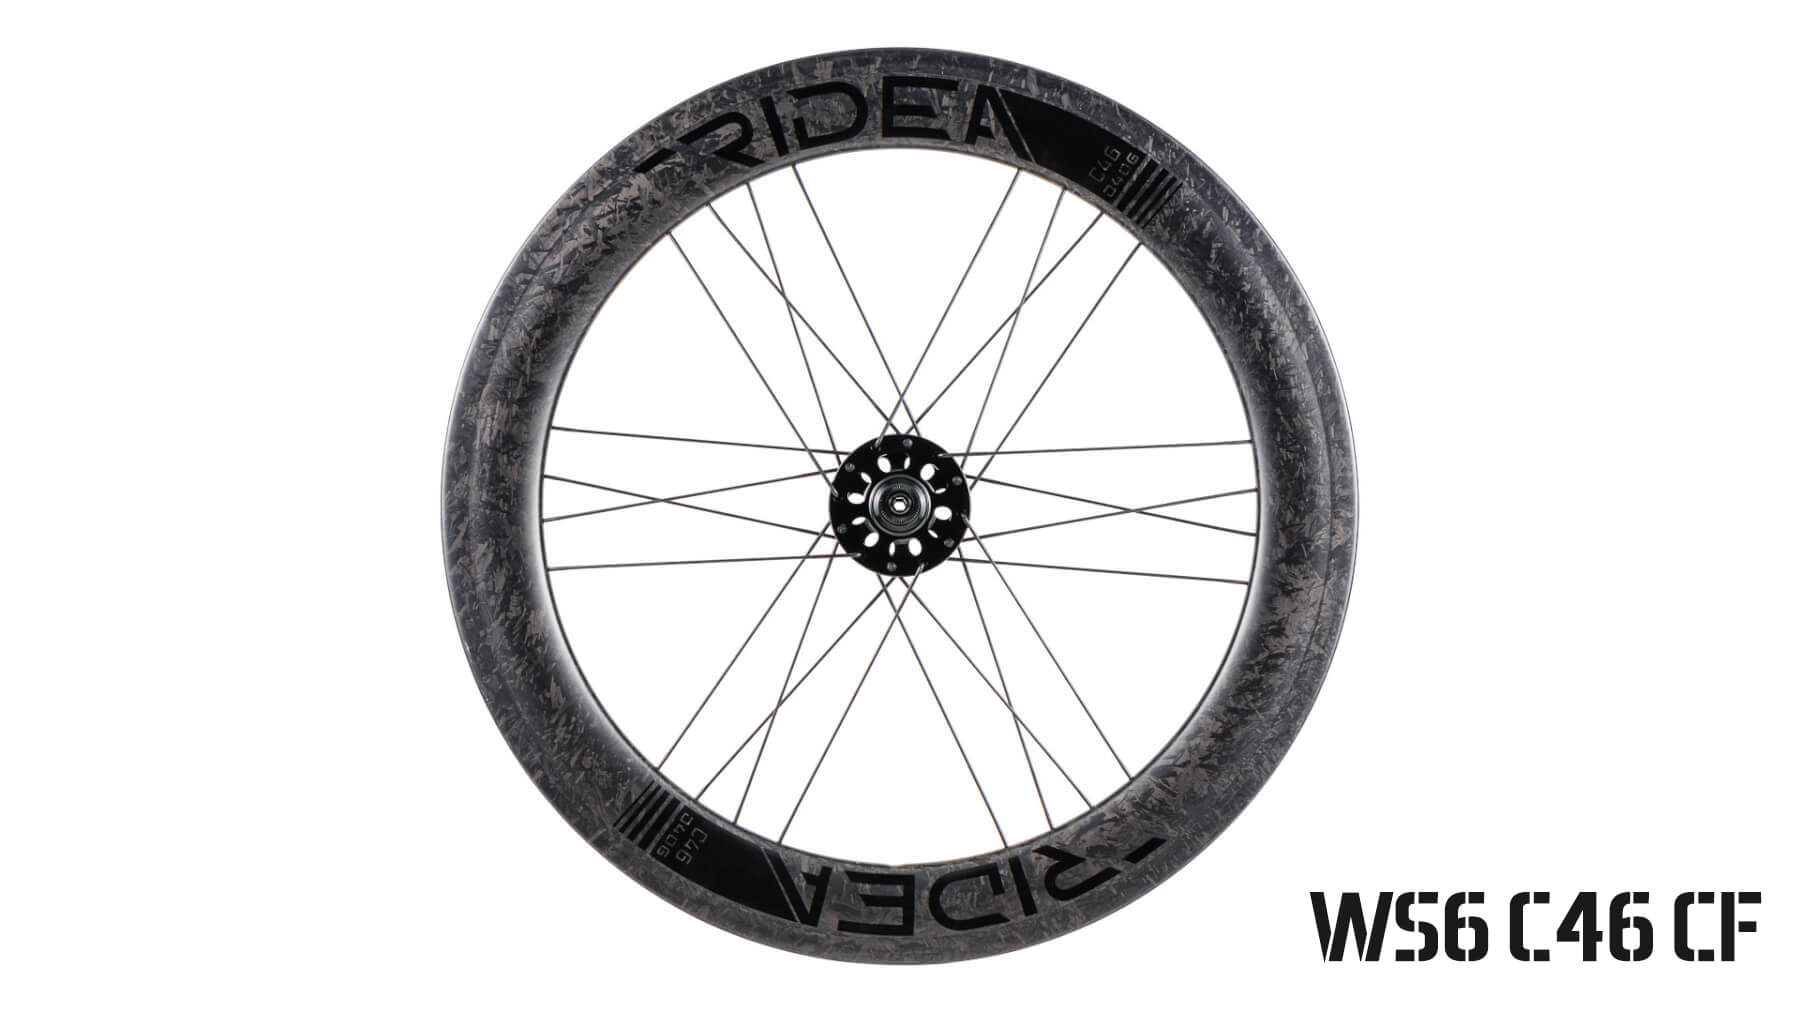 406 mm carbon wheels for Birdy